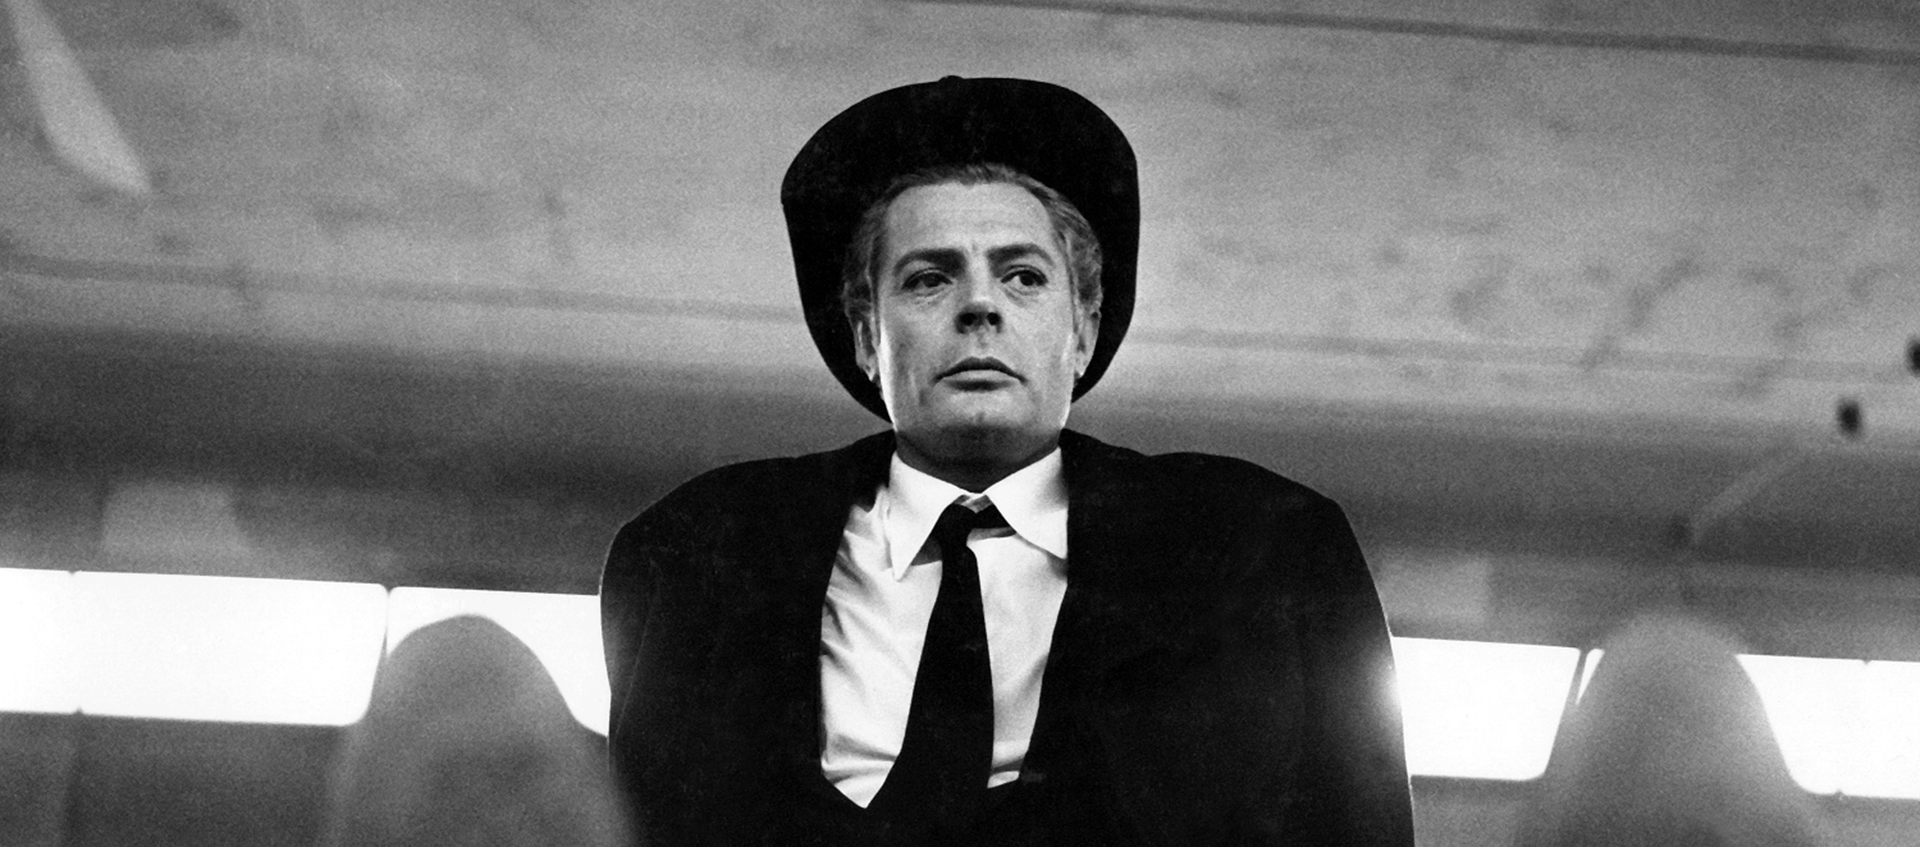 Black-and-white still of Guido (Marcello Mastroianni) sitting with legs outstretched, wearing a black suit, tie, and hat. A row of brightly lit windows is behind him.